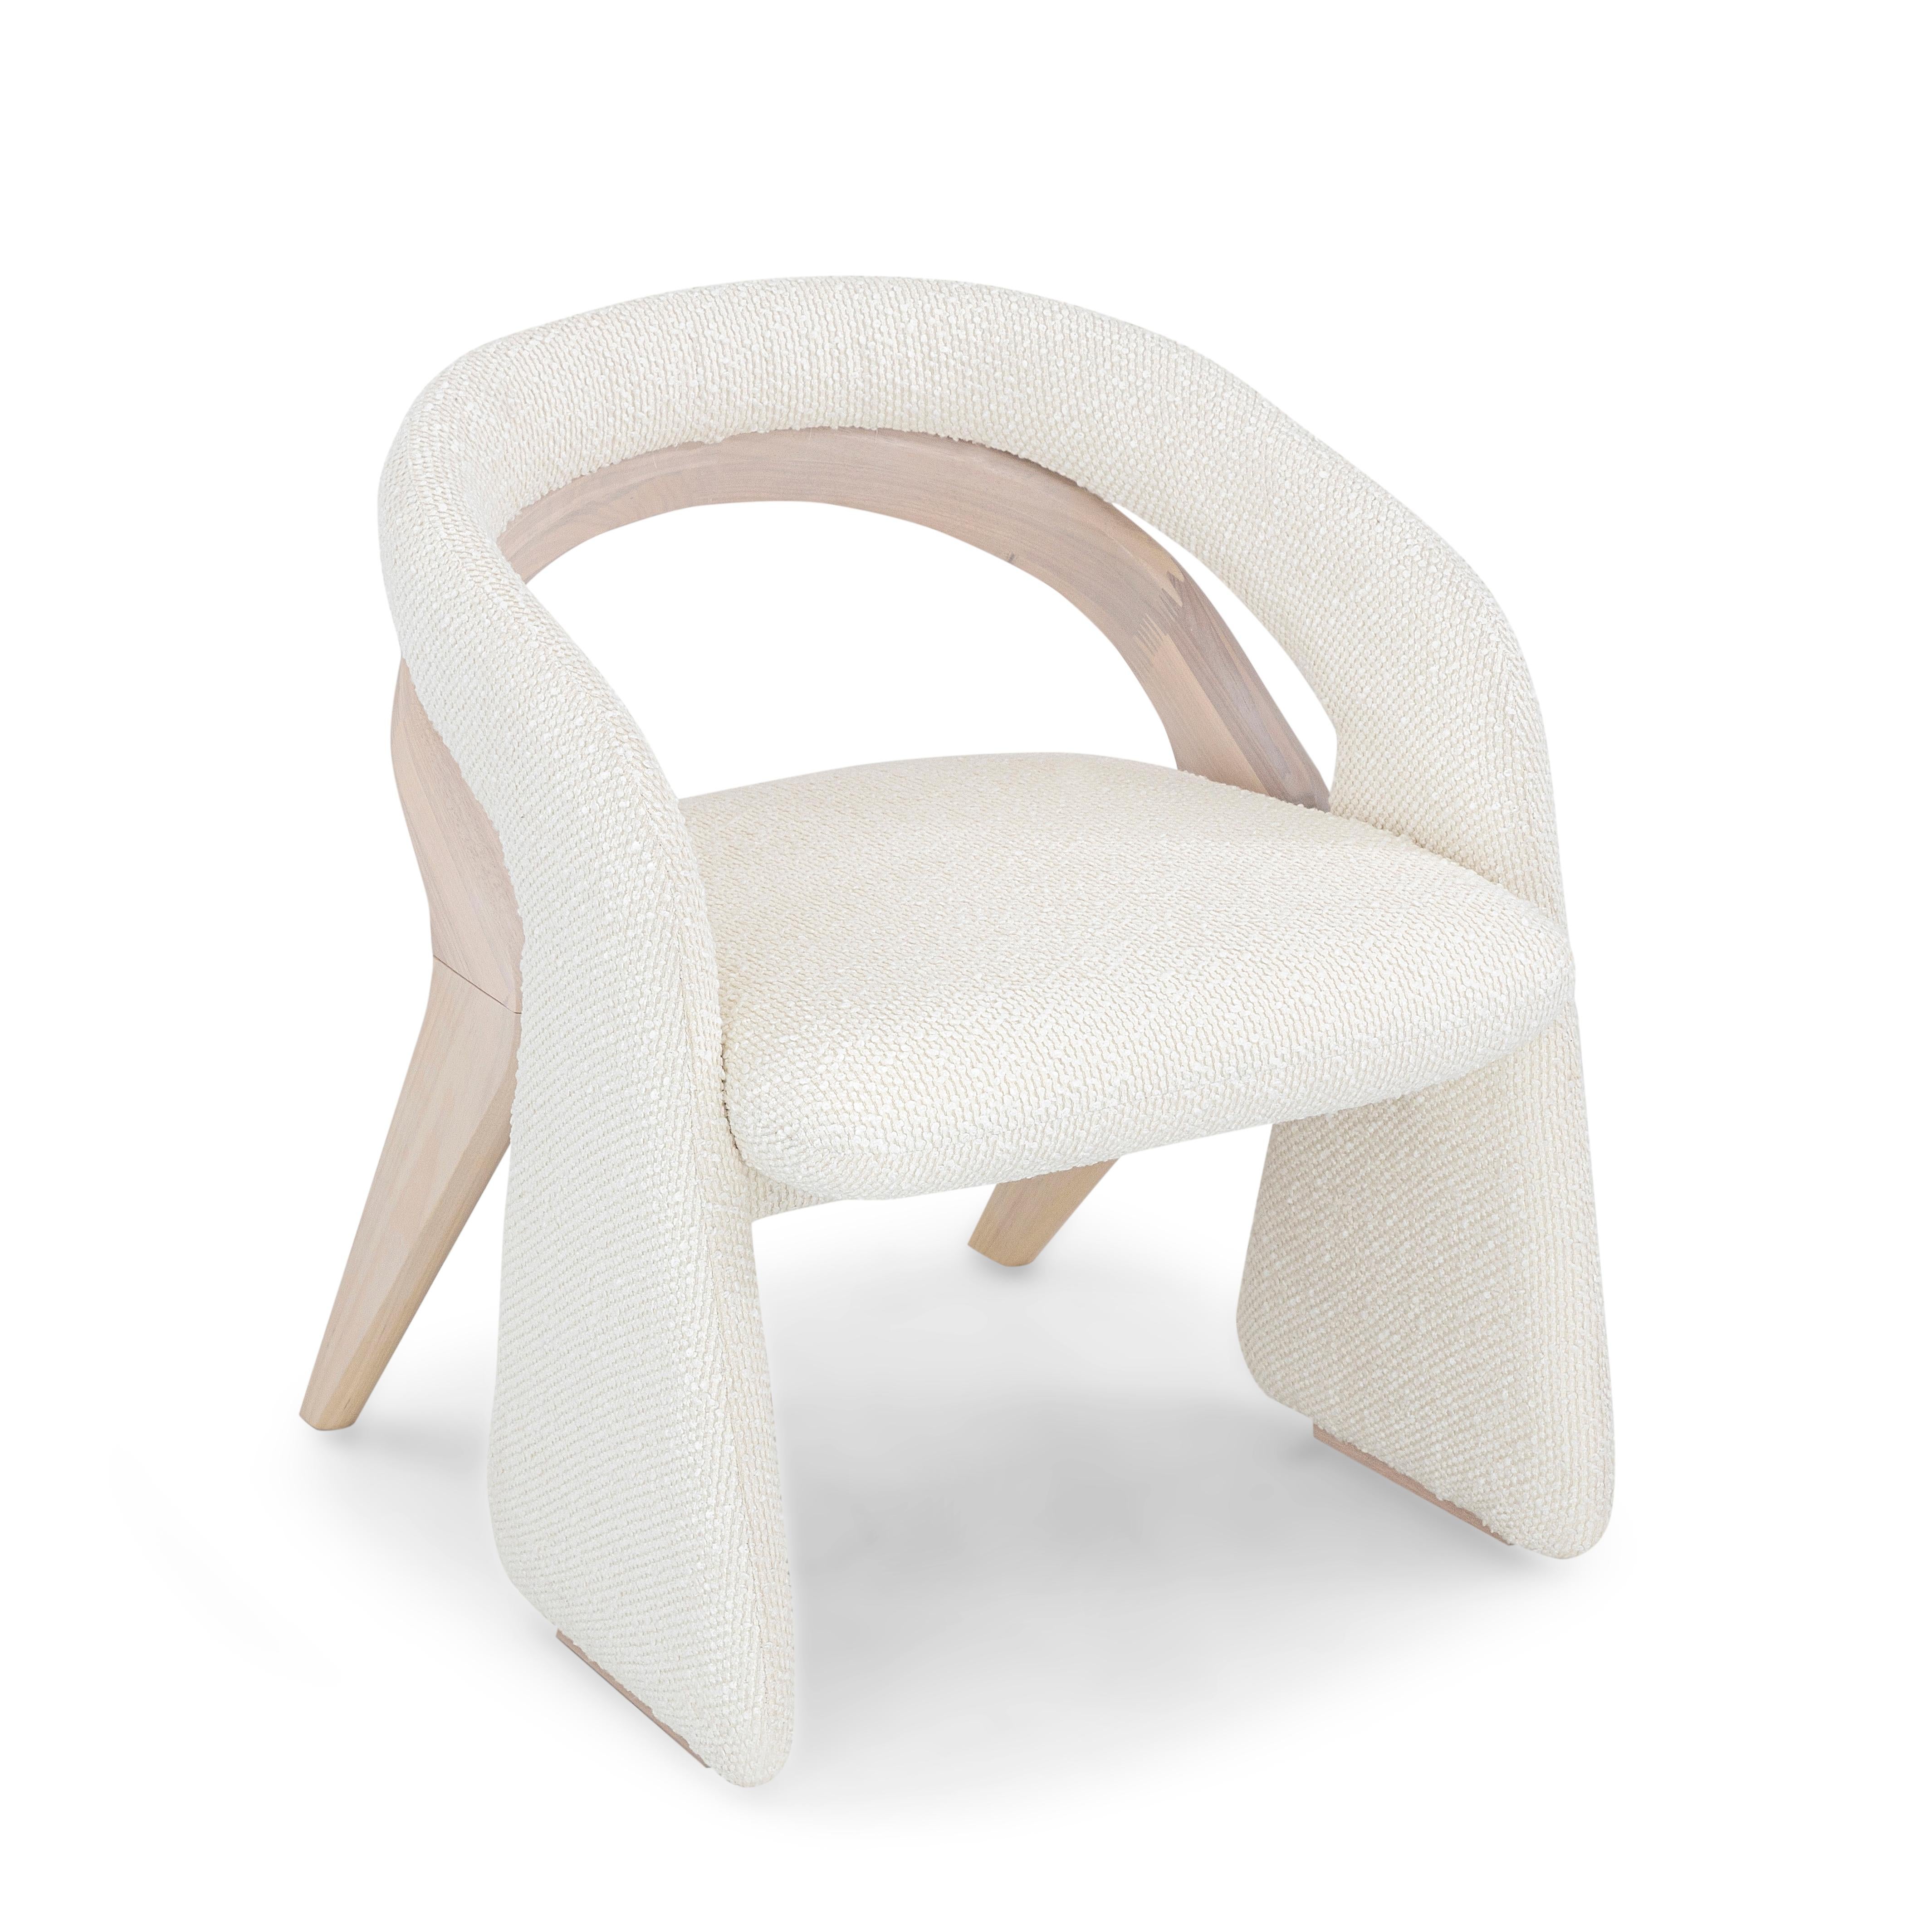 Olga offers unique modern features and an irreverent design that is a perfect fit for any bold and innovative project. Its solid wood frame and upholstery come together in a perfect union that creates a clean and contemporary atmosphere in any space.